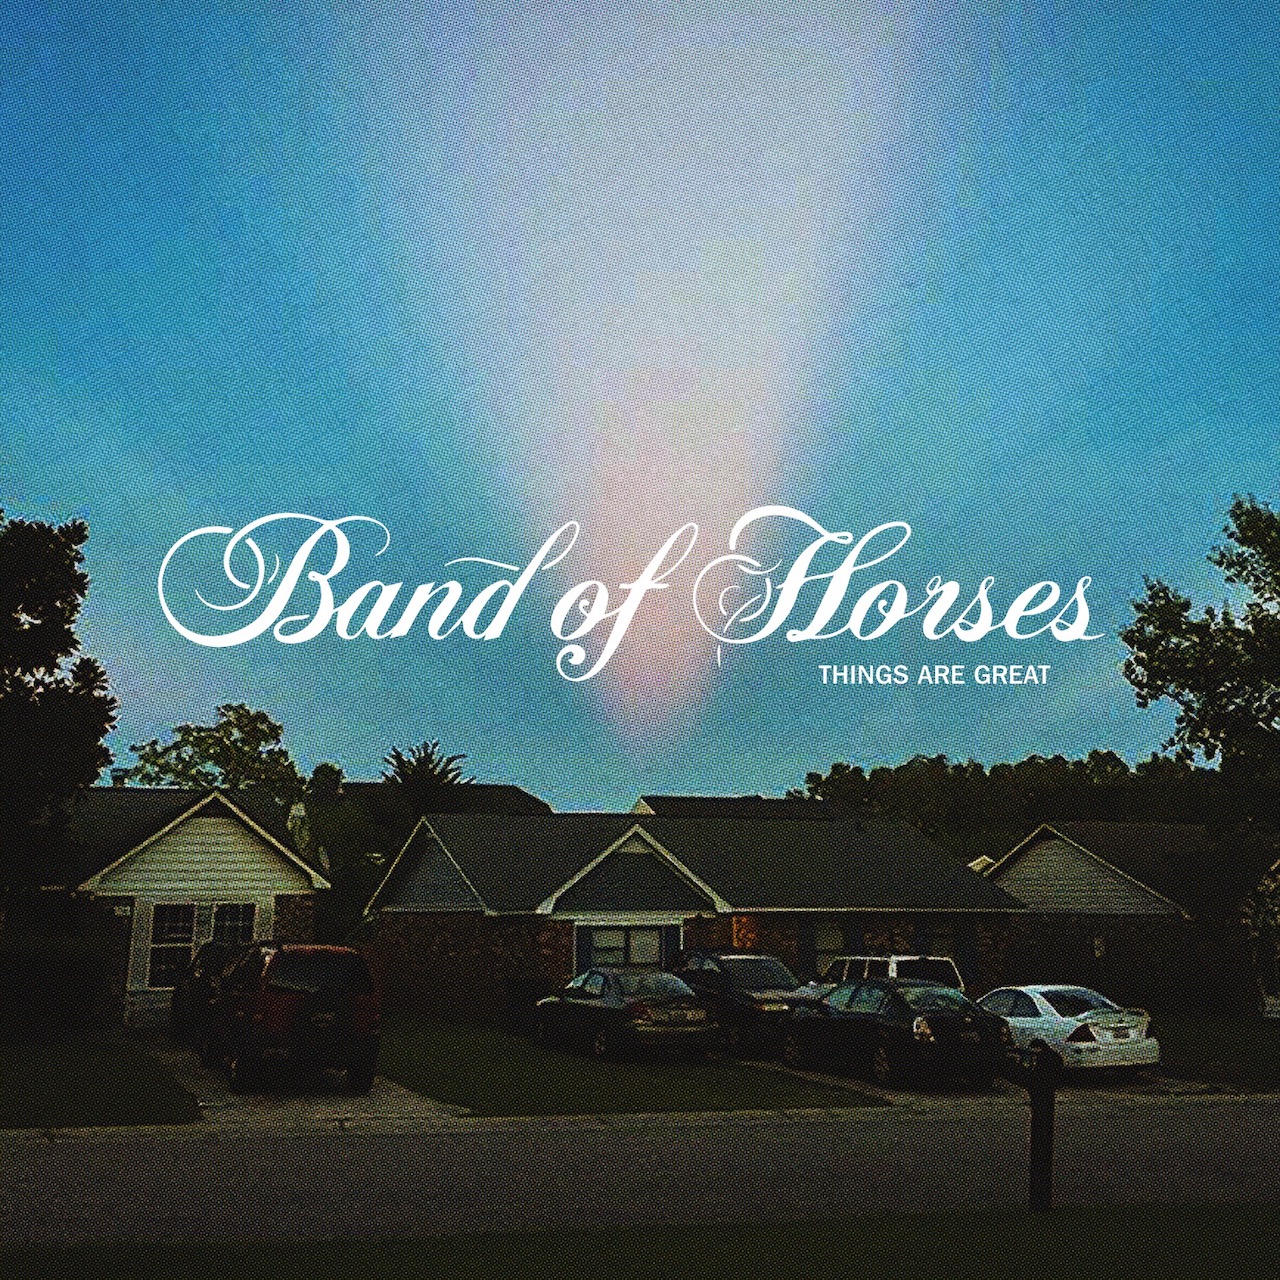 Band Of Horses "Things are great"